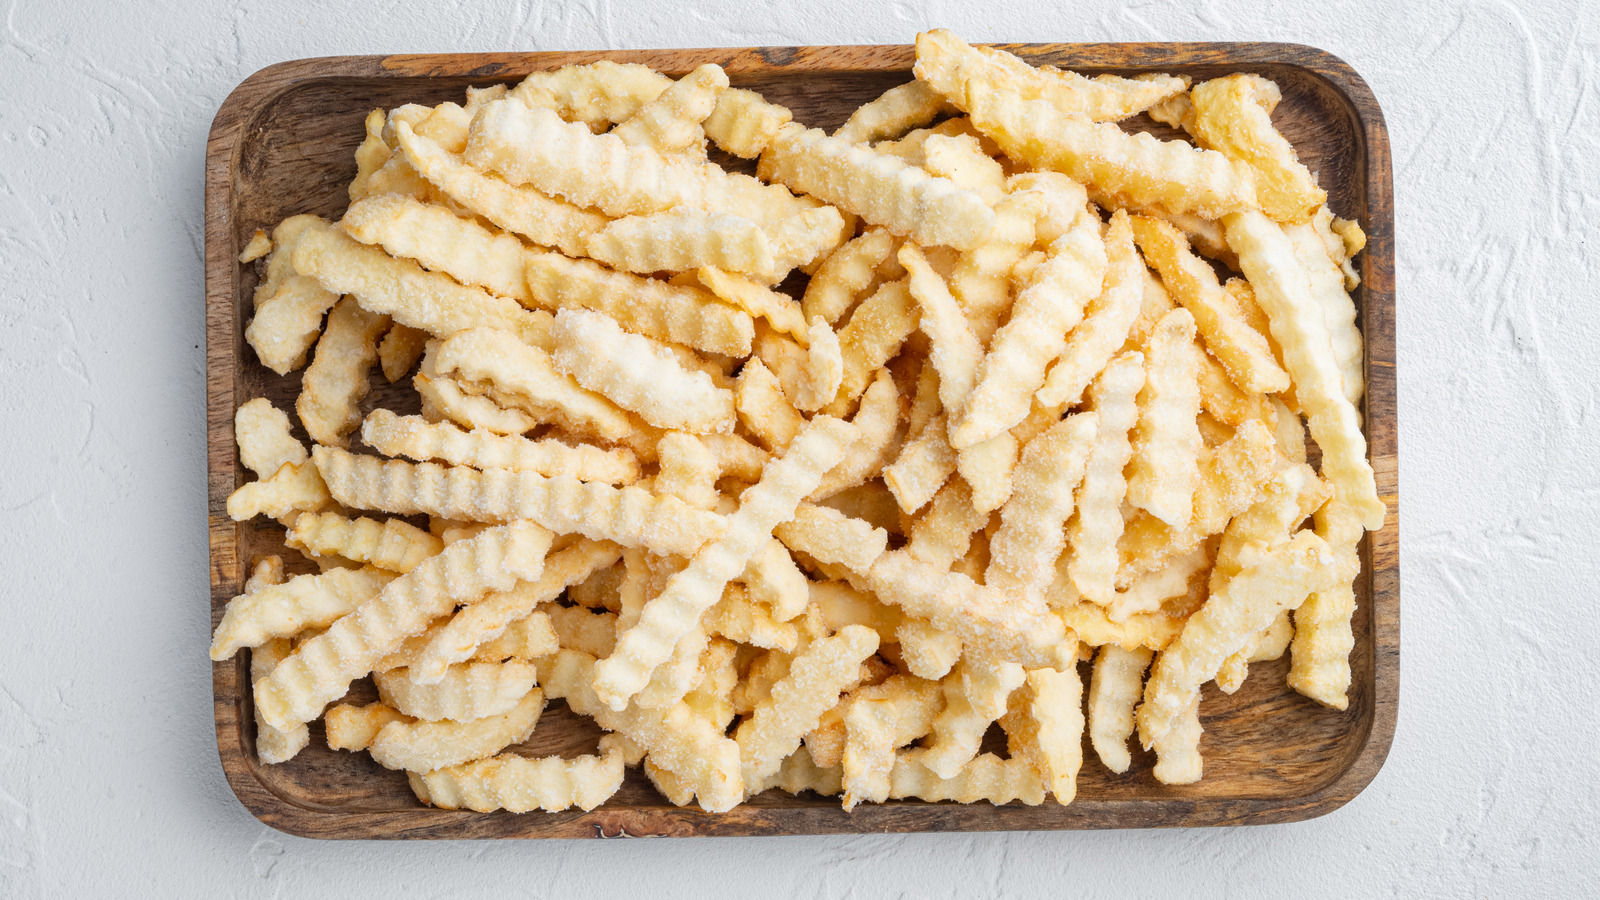 Homemade French Fries - Frozen